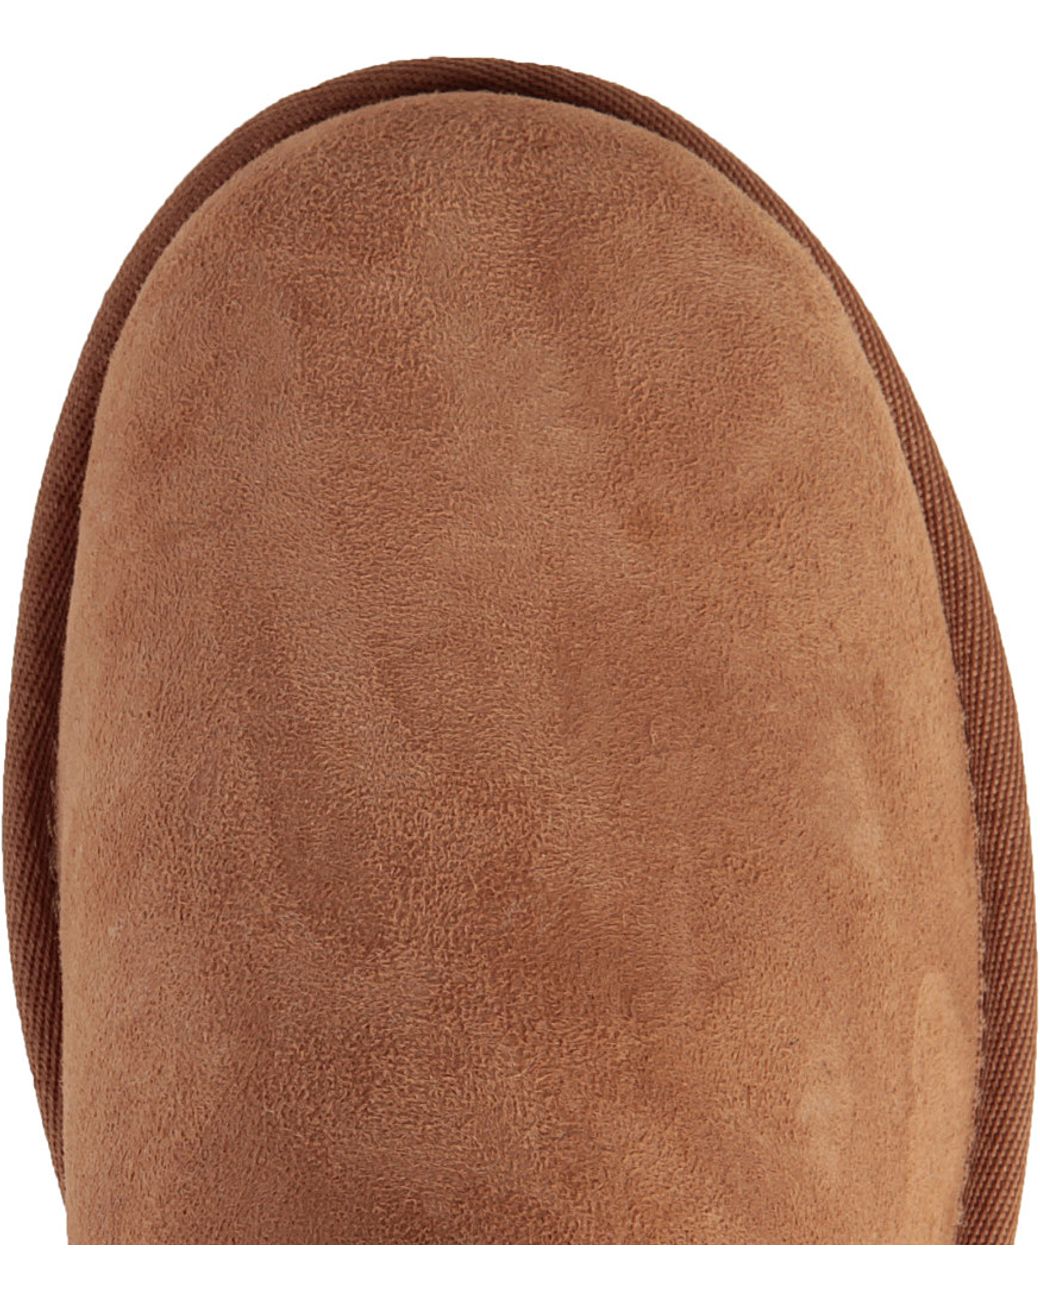 UGG Classic Short Breast Cancer Awareness Boots in Brown | Lyst UK